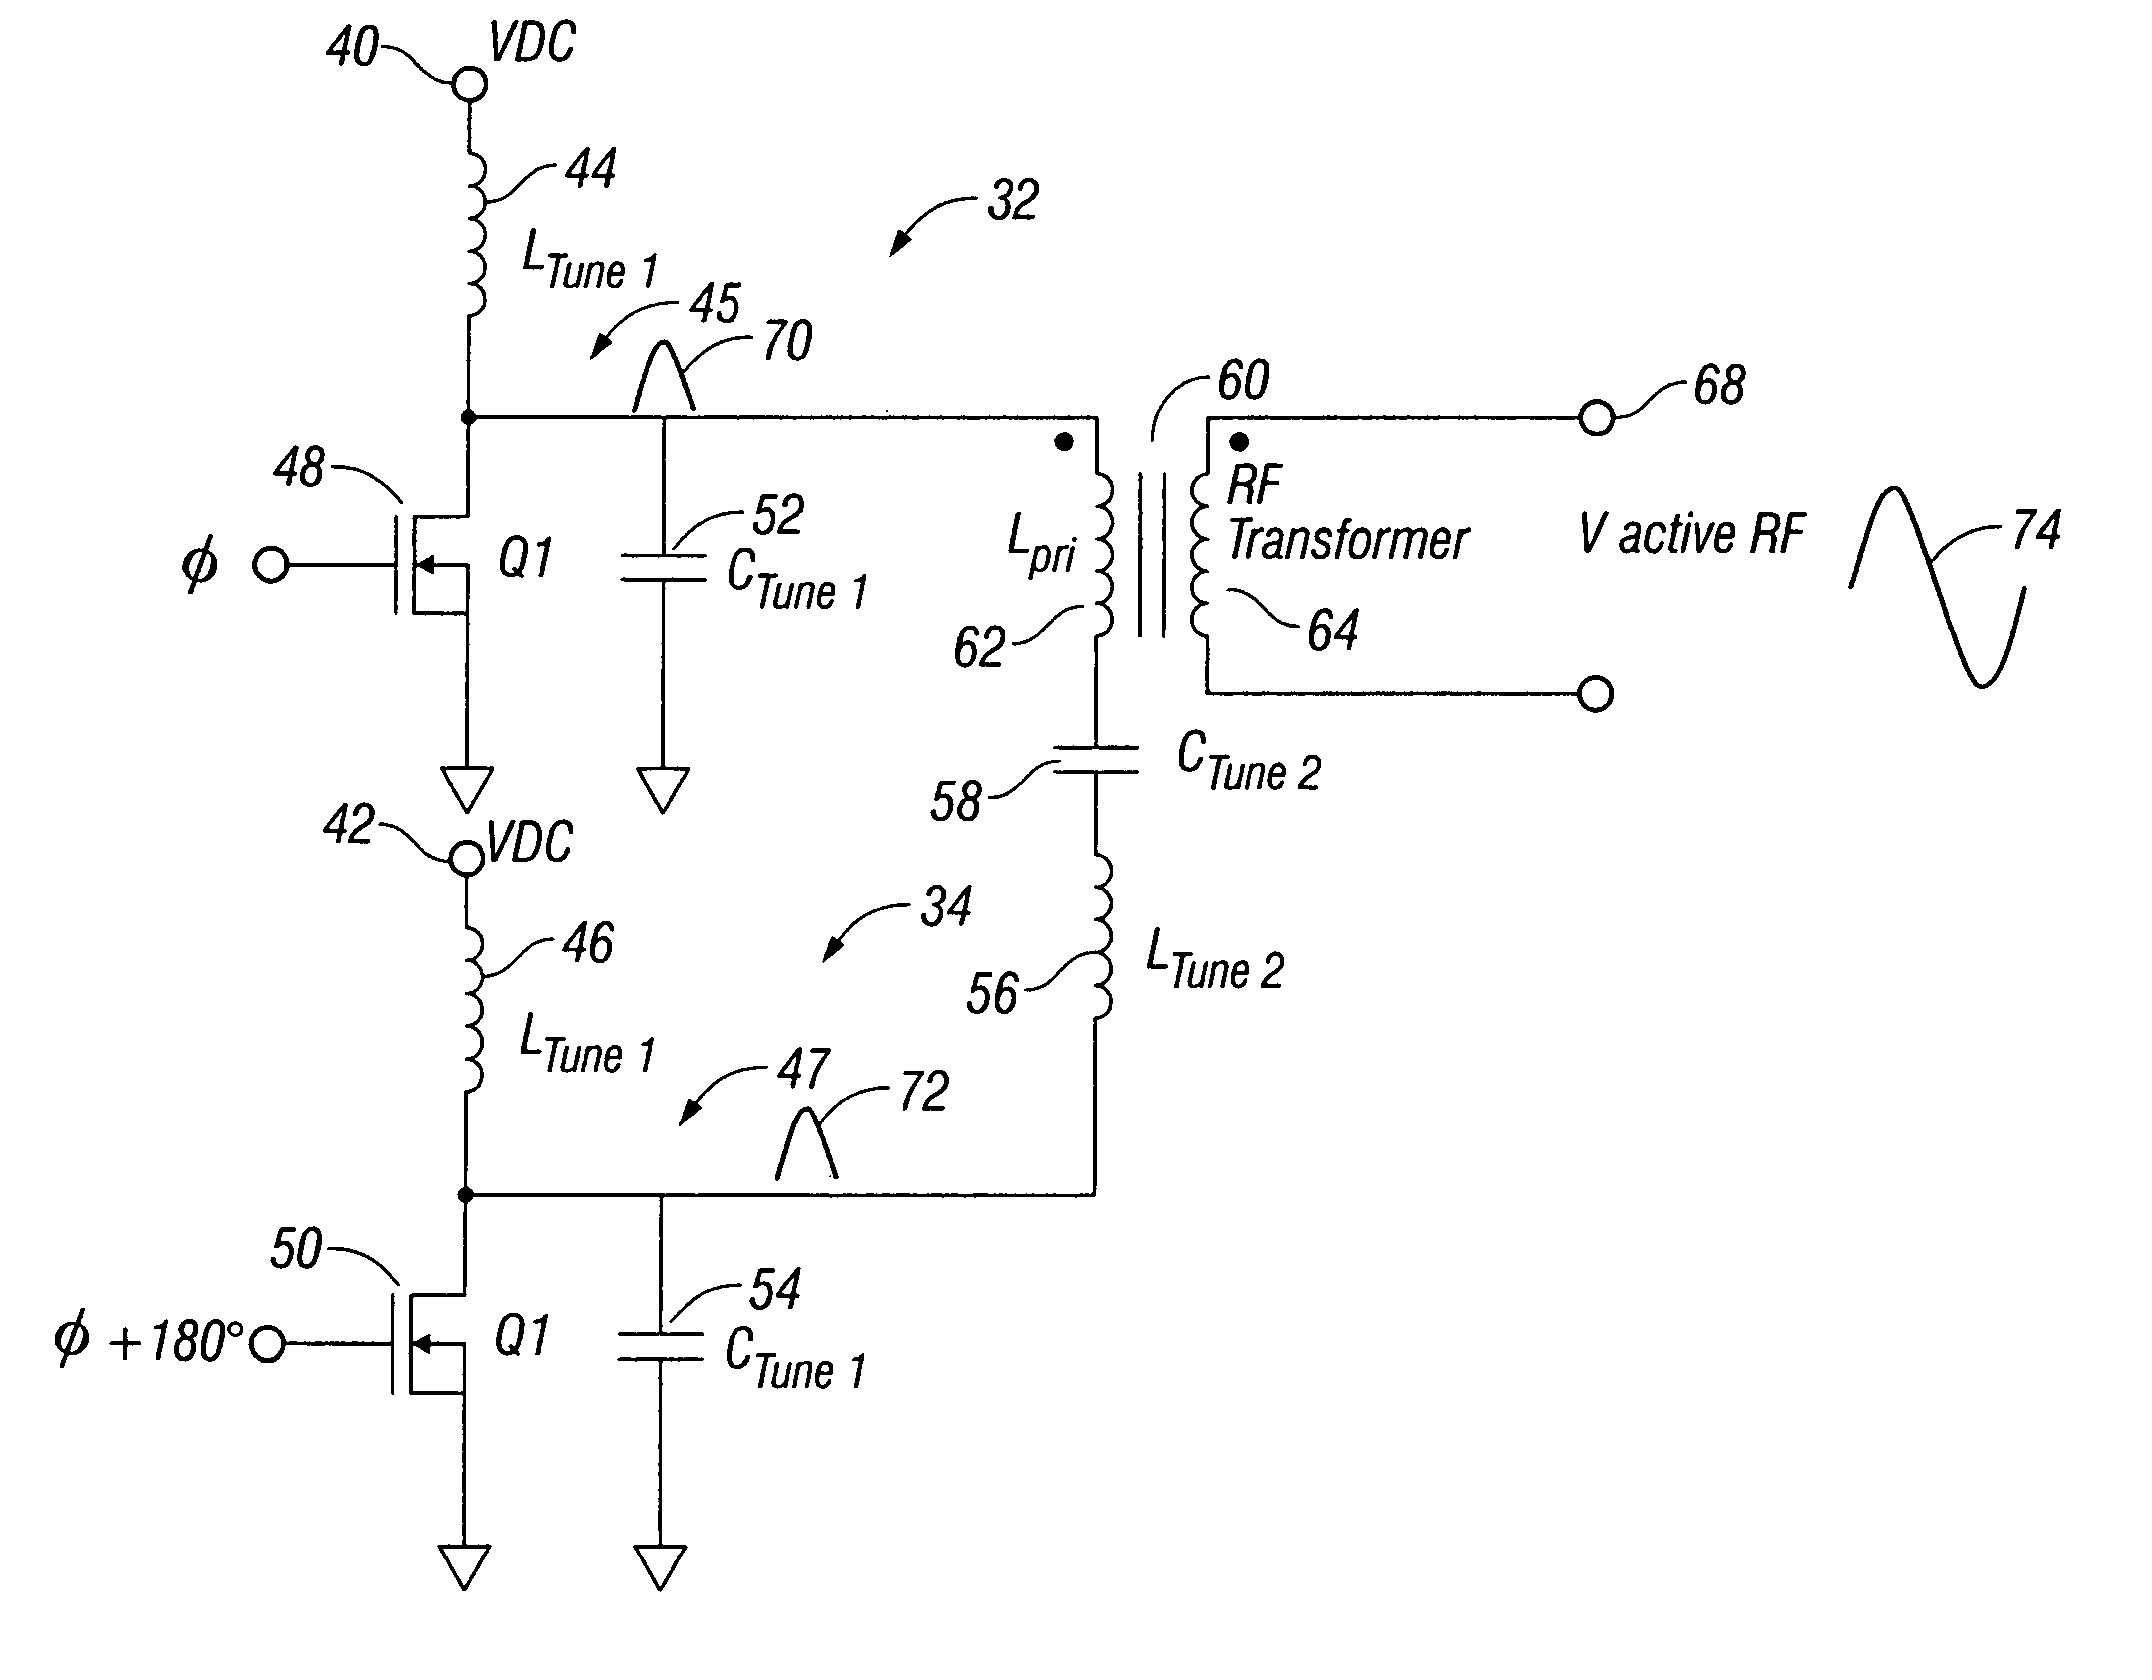 System and method for generating radio frequency energy